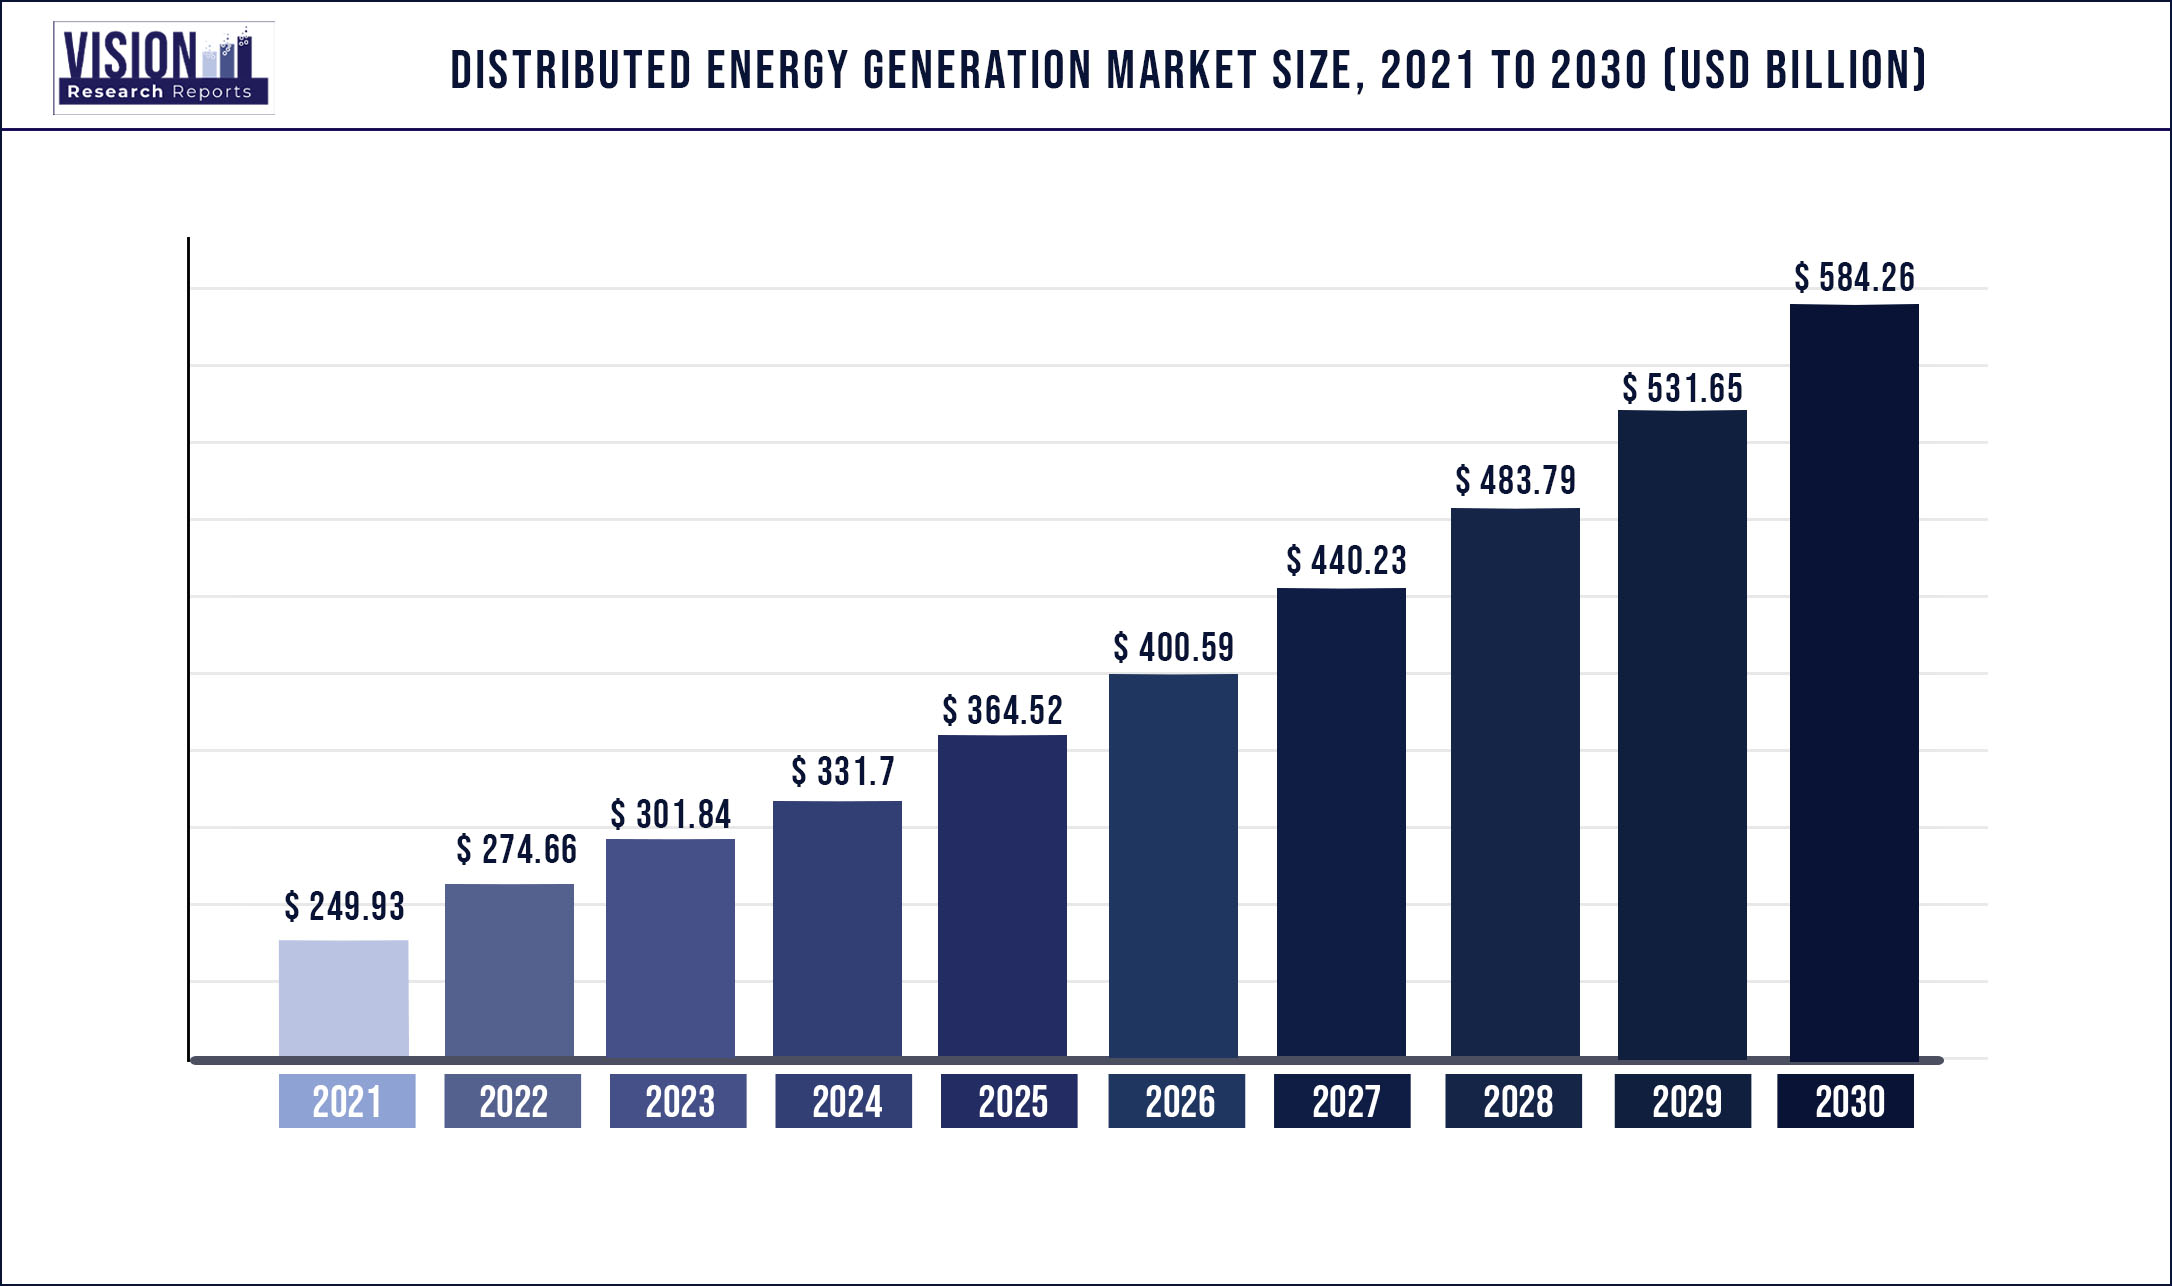 Distributed Energy Generation Market Size 2021 to 2030